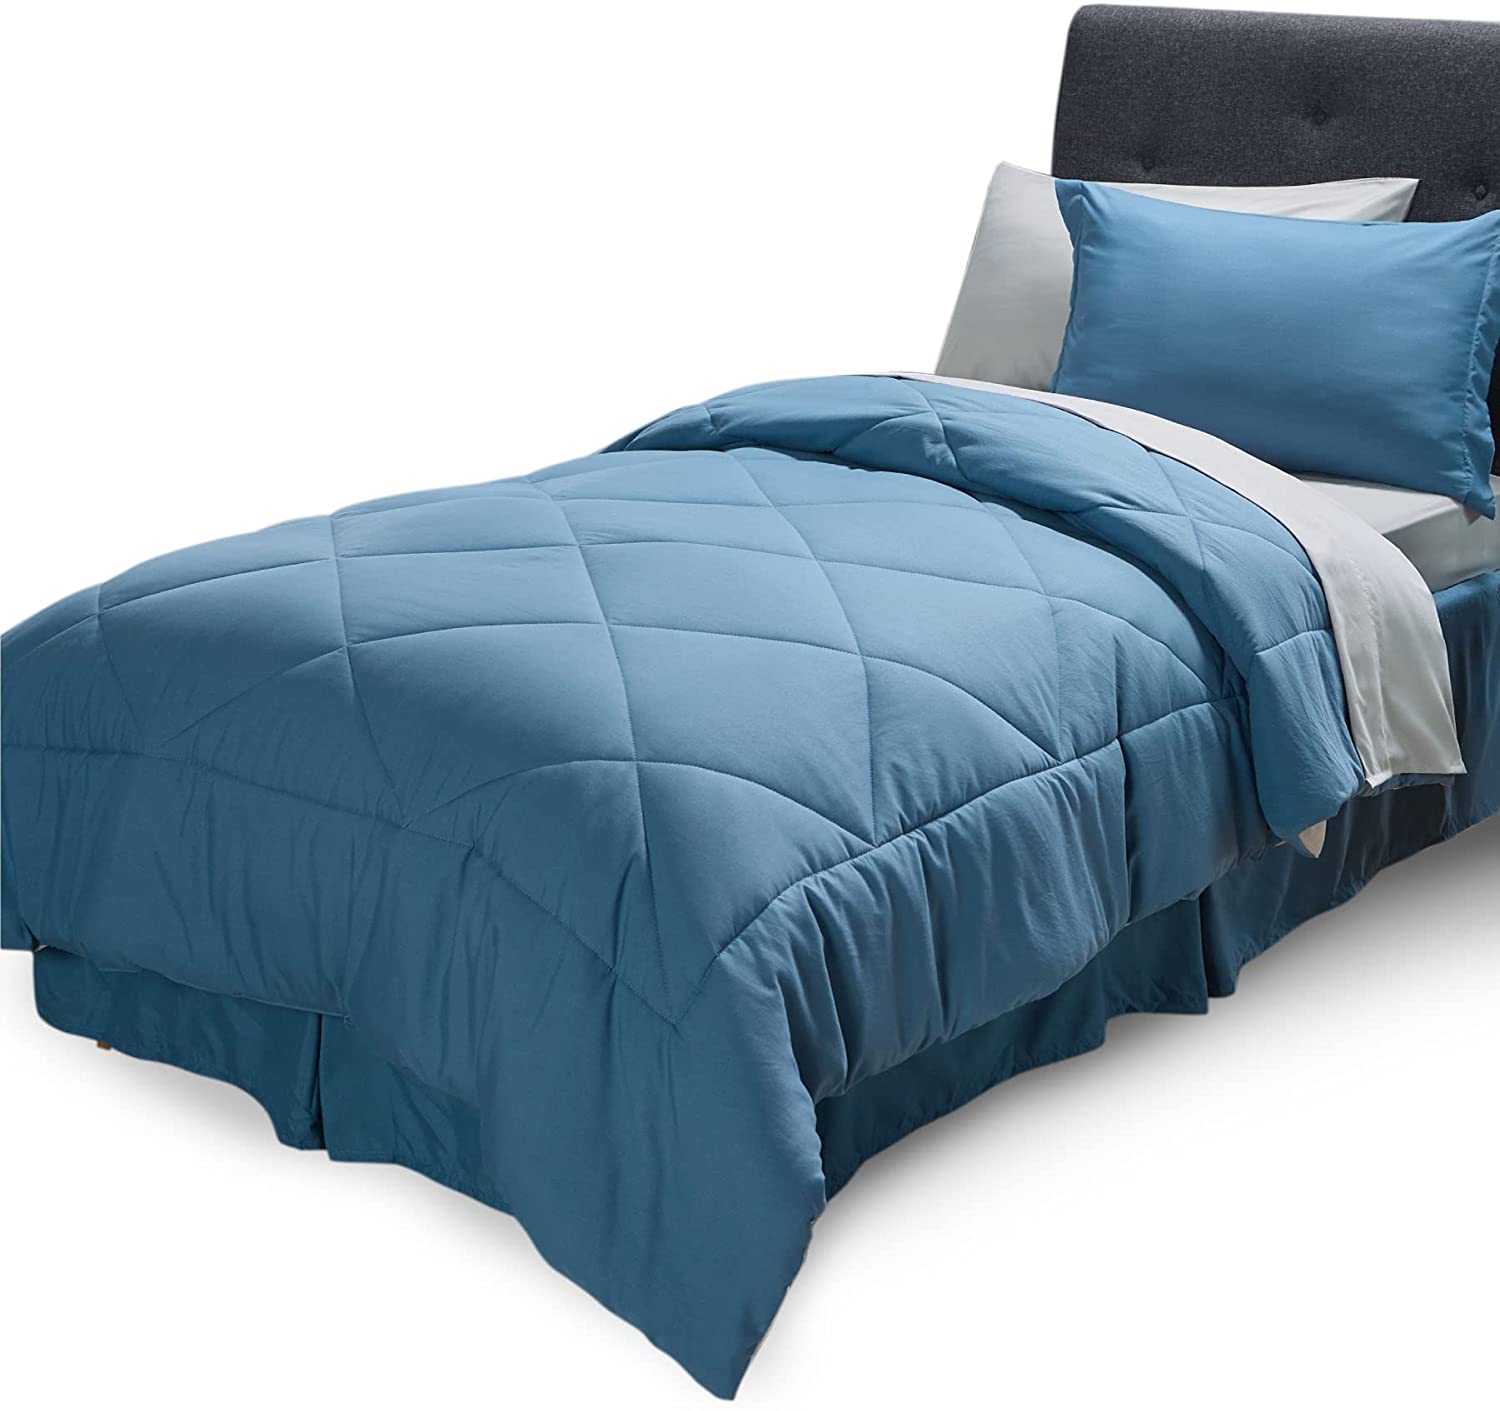 Details about   Bedsure Twin XL Comforter Sets Bedding Comforters for Twin XL Bed with Sheets Be 